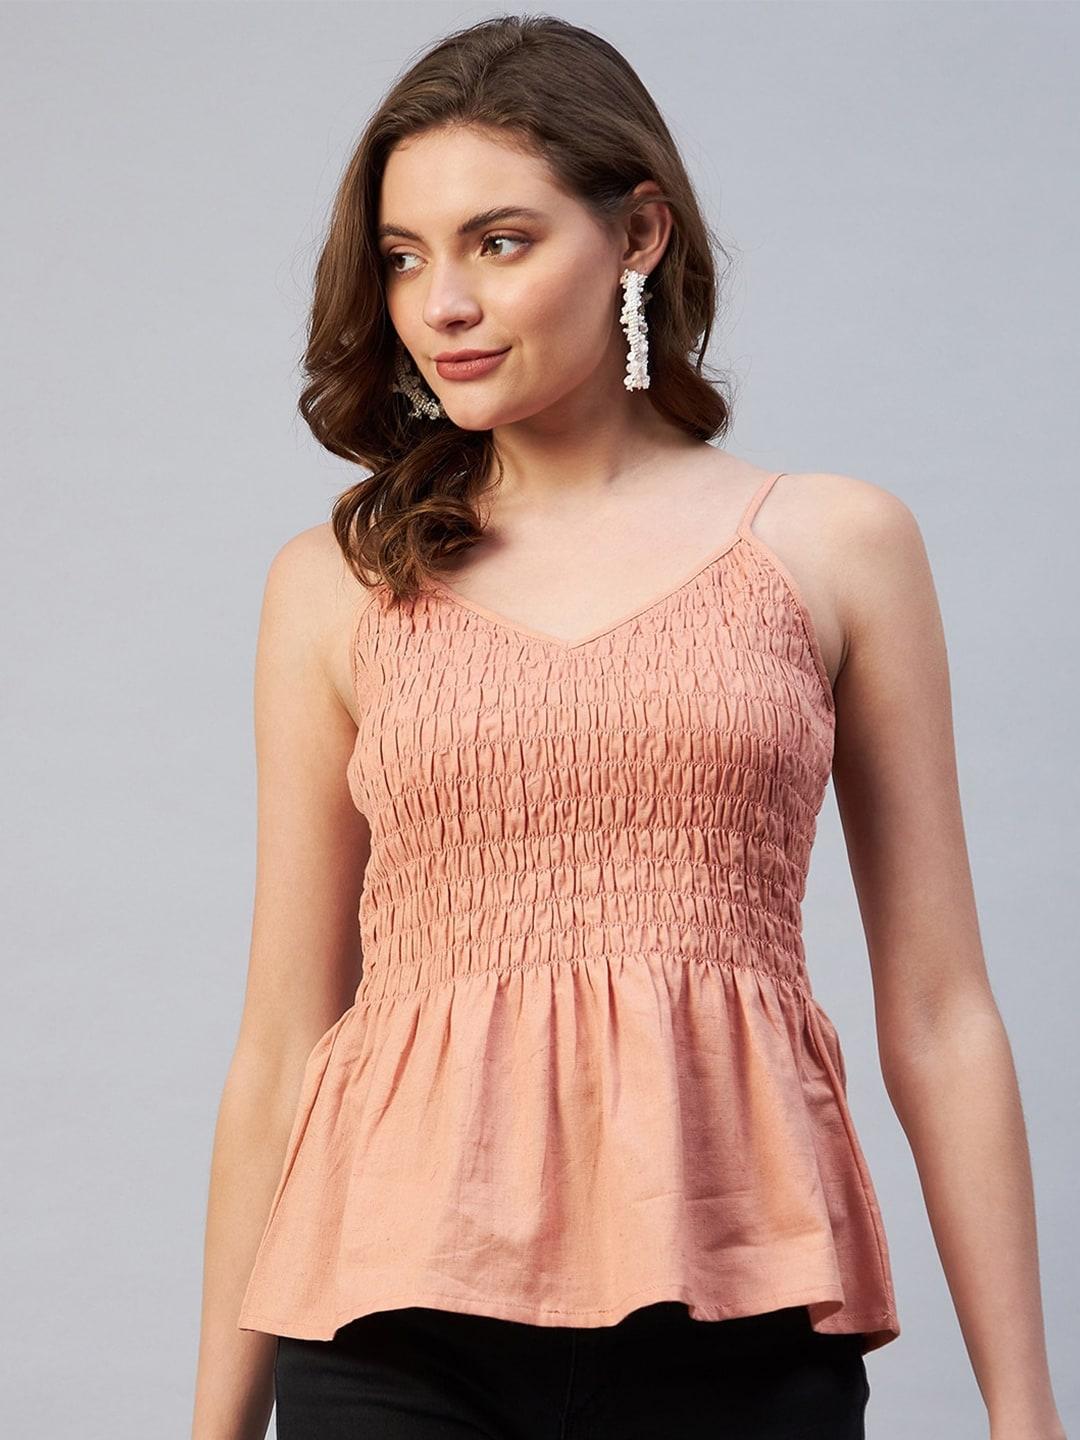 marie-claire-women-peach-colored-smocked-peplum-top